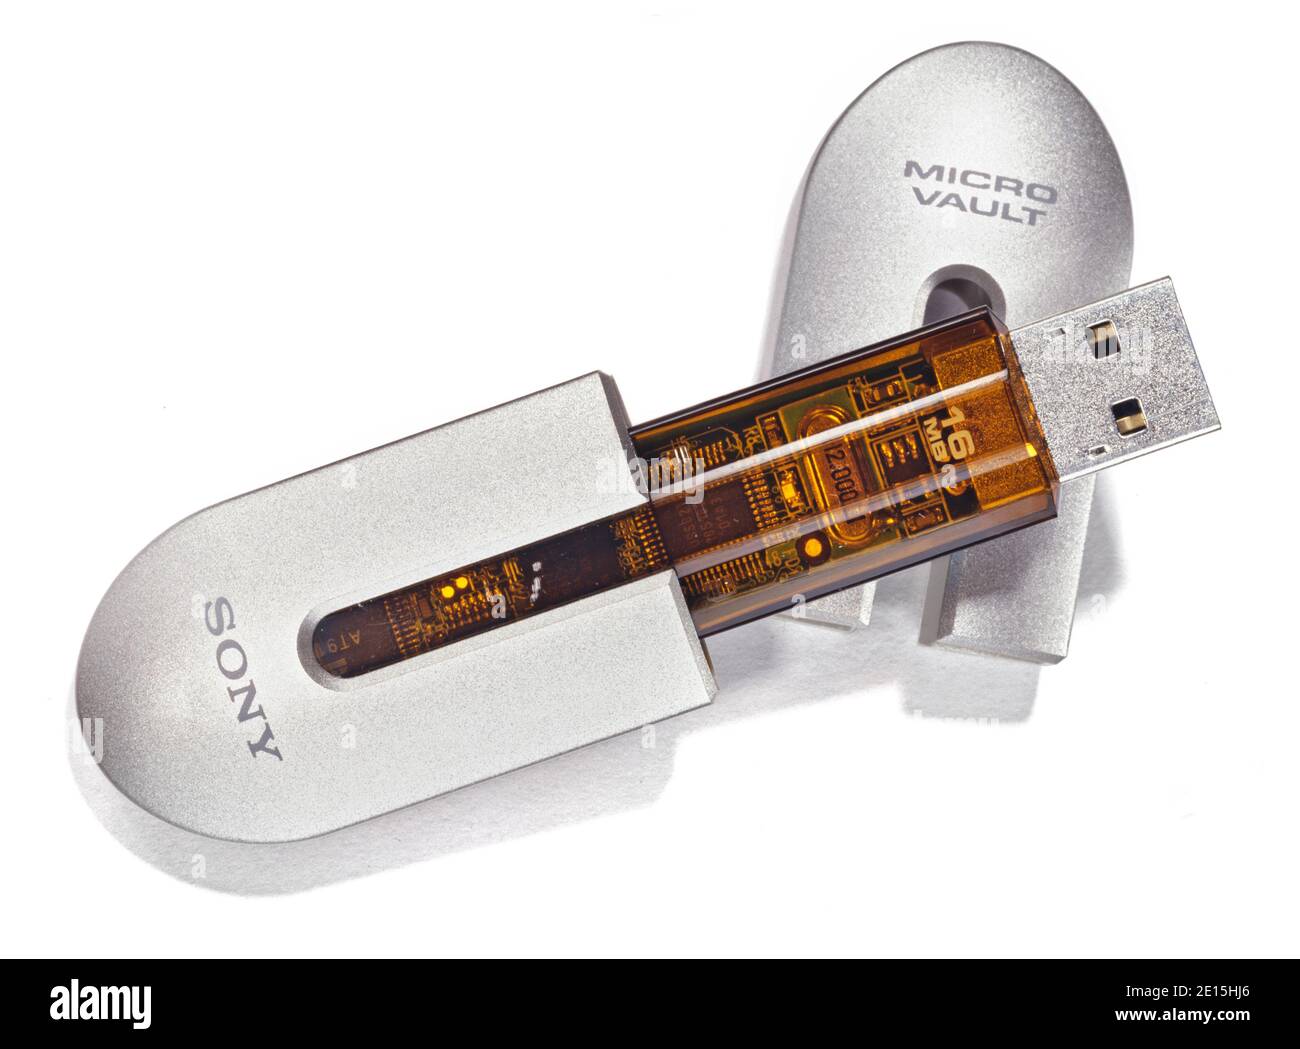 SONY Micro Vault USB drive photographed on a white background Stock Photo -  Alamy